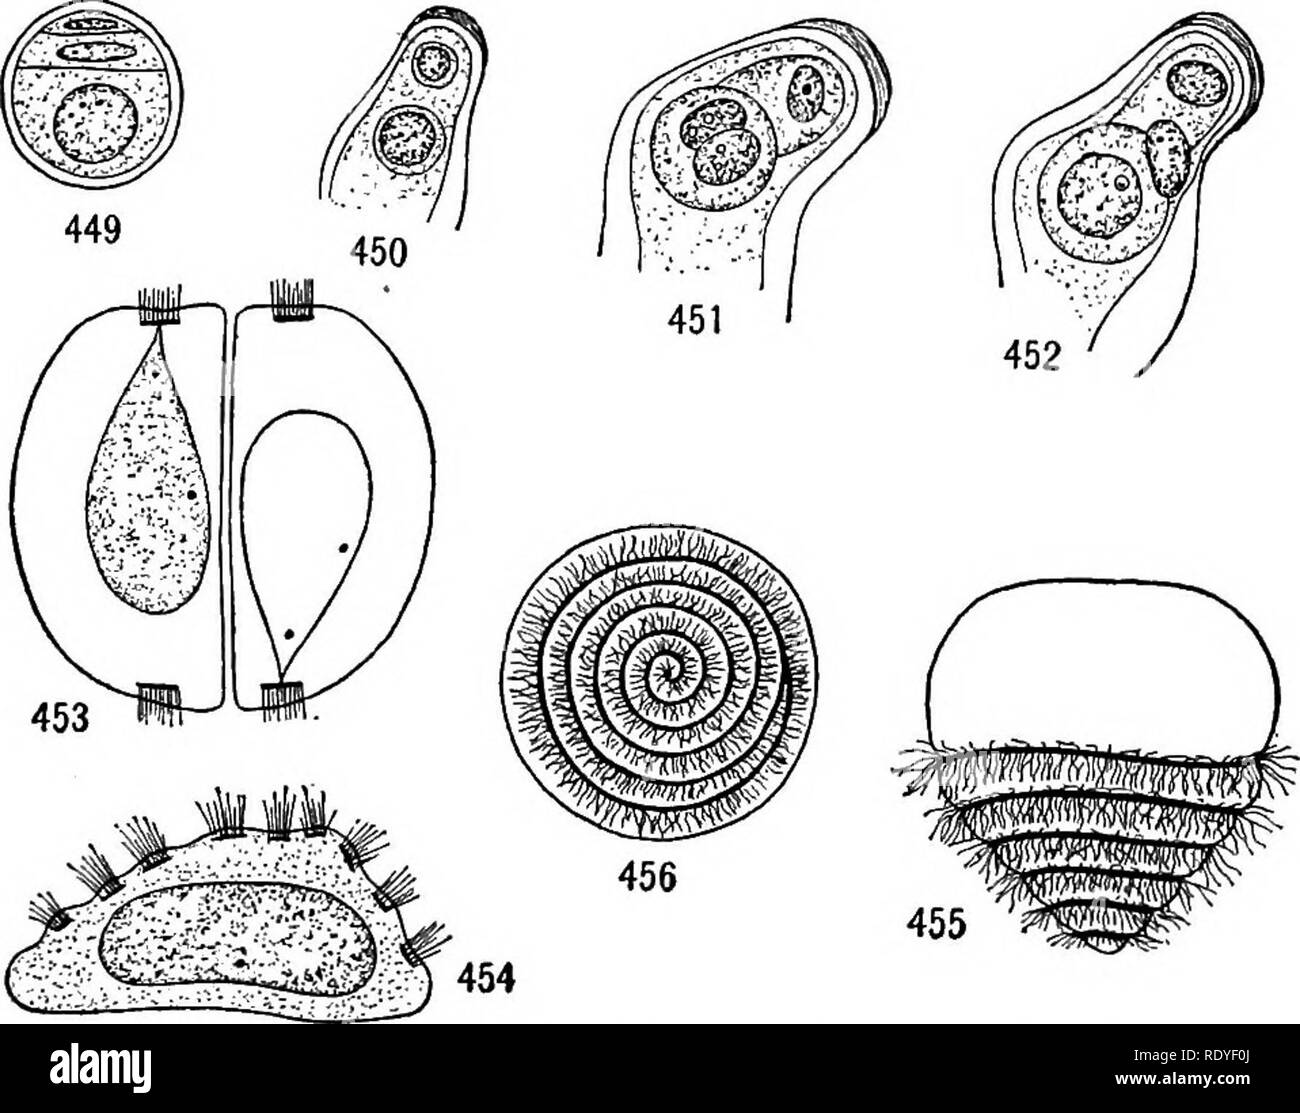 . A textbook of botany for colleges and universities ... Botany. Fig. 44S. — Diagram of embryo sac (containing fe- male gametophyte) of Dioon, showing two archegonia and the archegonial chamber.— After Chamberlain.. Figs. 449-456. — Male gametophyte of Cycas revoluta: 449, shedding stage of micro- spore (pollen grain), showing persistent vegetative cell, generative cell, and tube cell; 450, later stage (after shedding), showing rounded-off vegetative and generative cells (tube nucleus has passed into the pollen tube); 451, division of nucleus of generative cell into nuclei of stalk and body ce Stock Photo